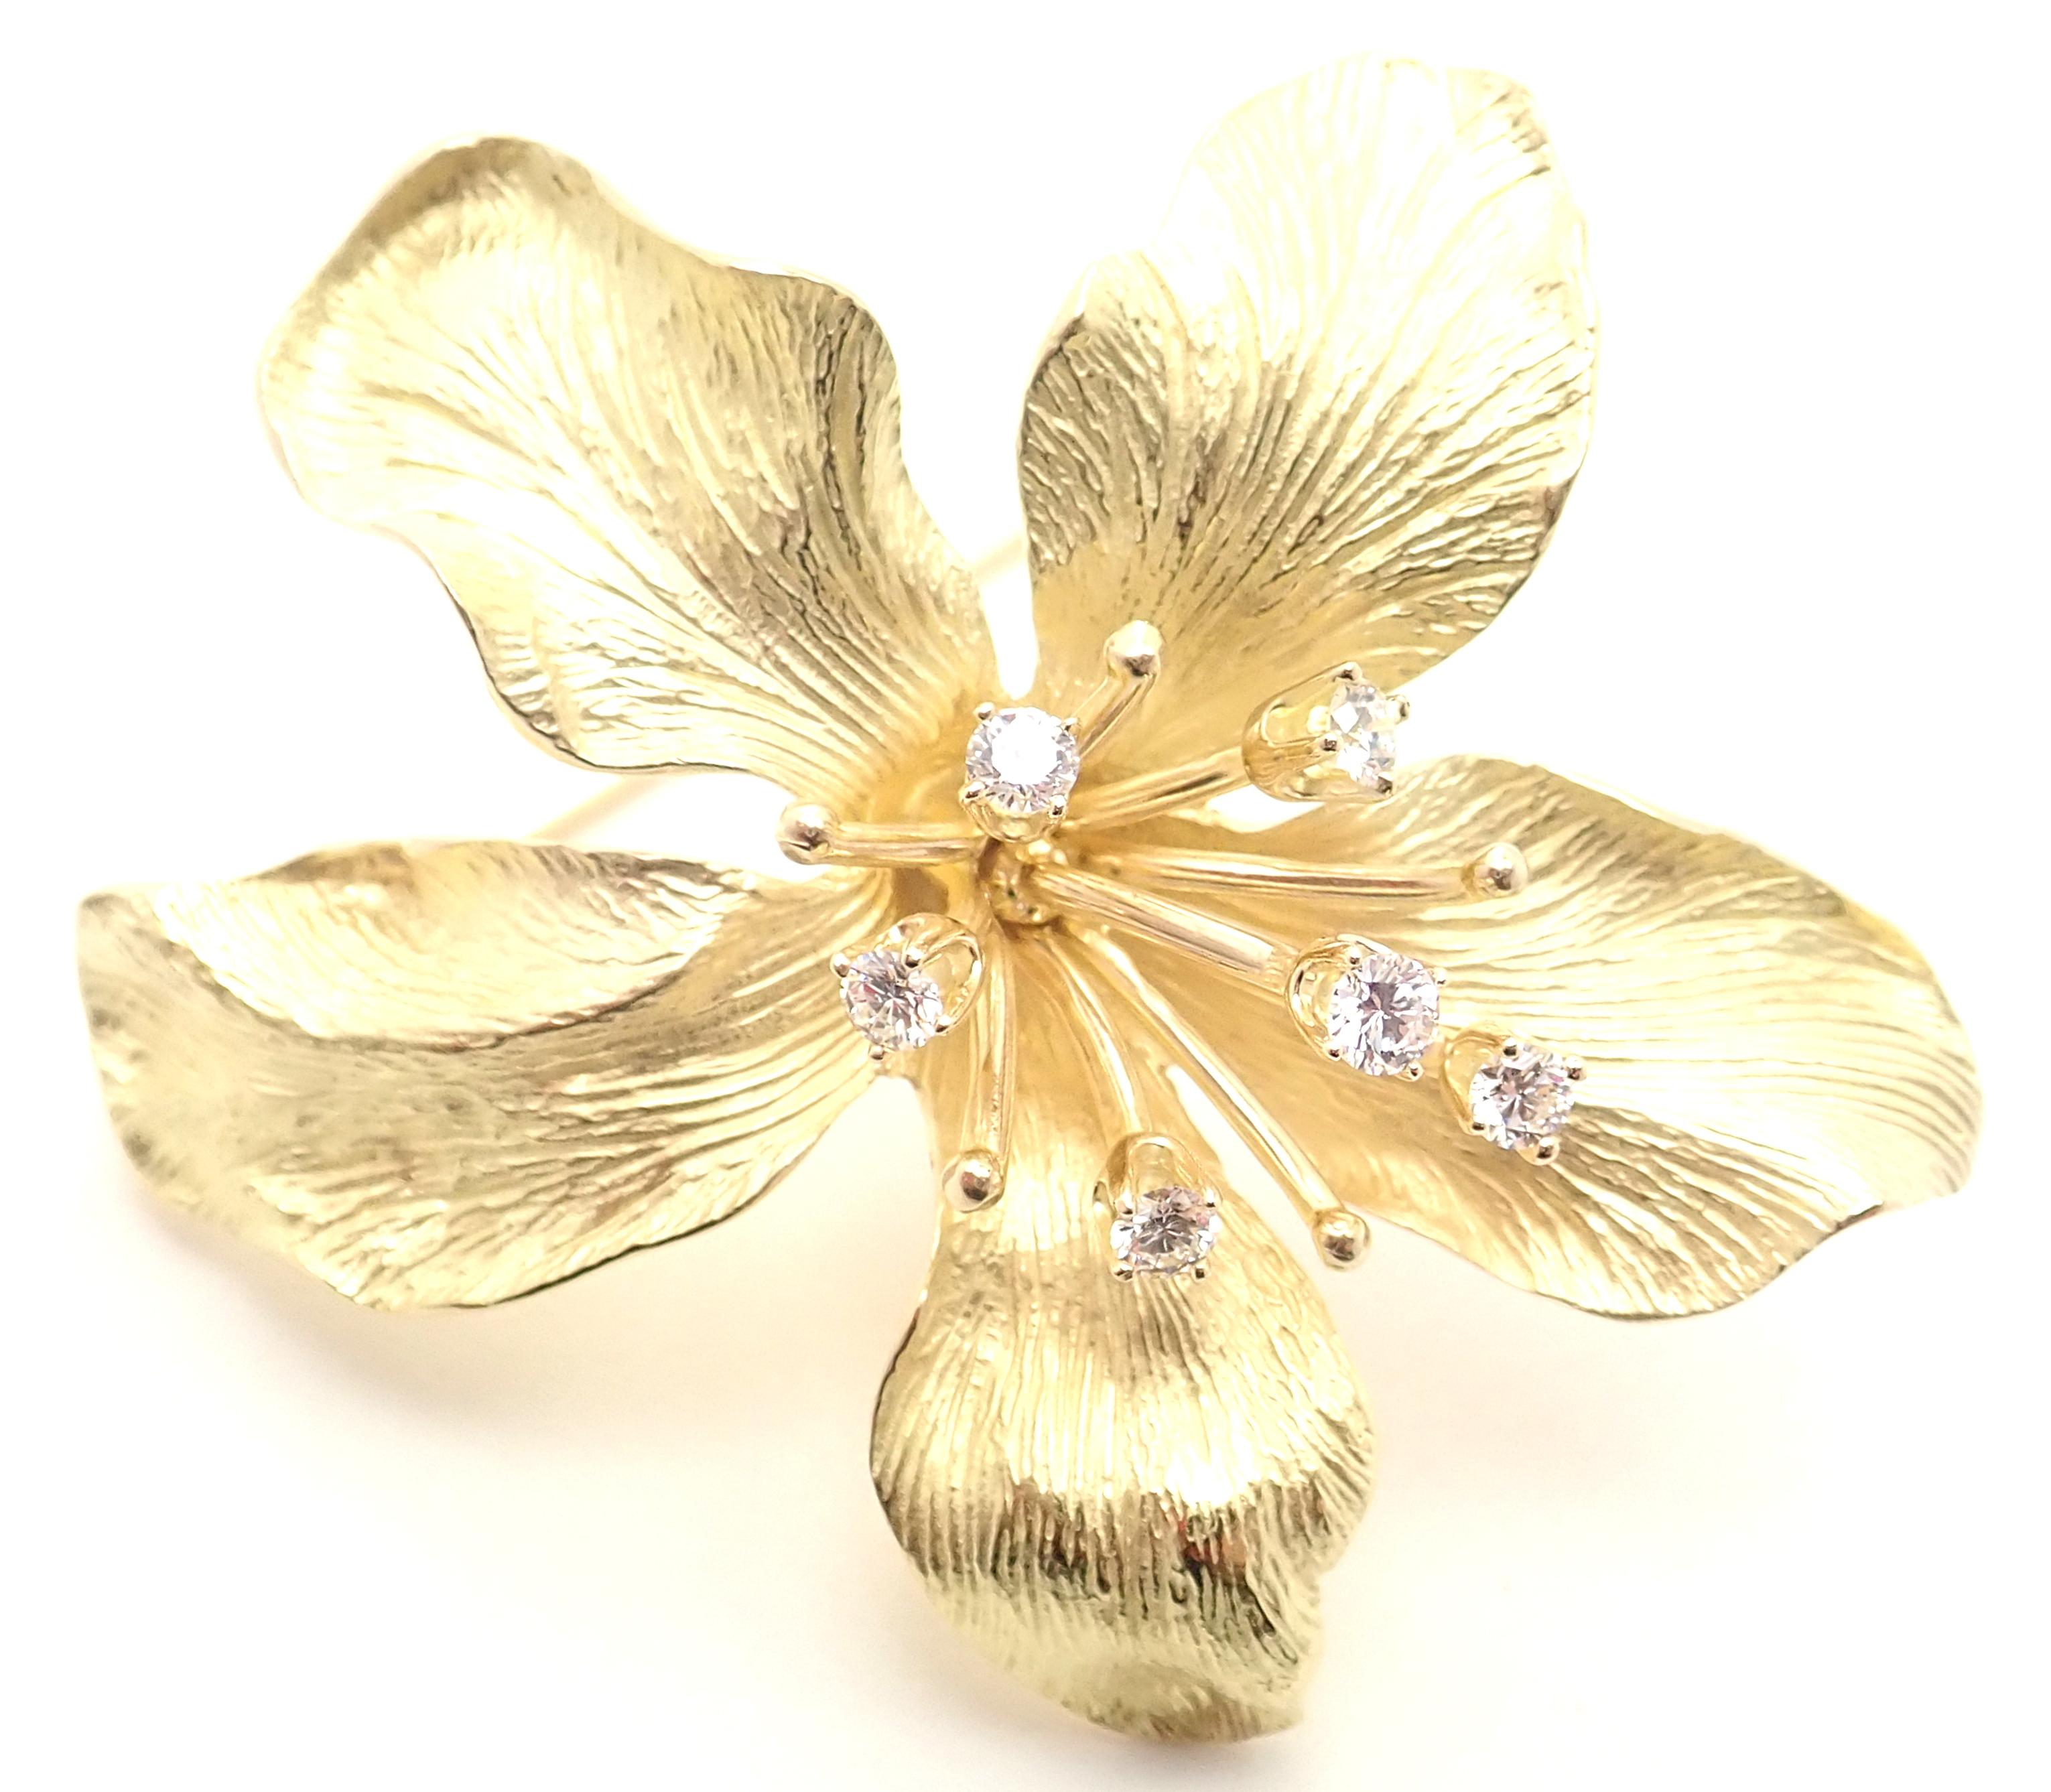 18k Yellow Gold Vintage Diamond Lily Flower Brooch Pins by Tiffany & Co. 
With 6 round brilliant cut diamonds VS1 clarity, G color total weight approximately .36ct
Details: 
Measurements: 1 3/4